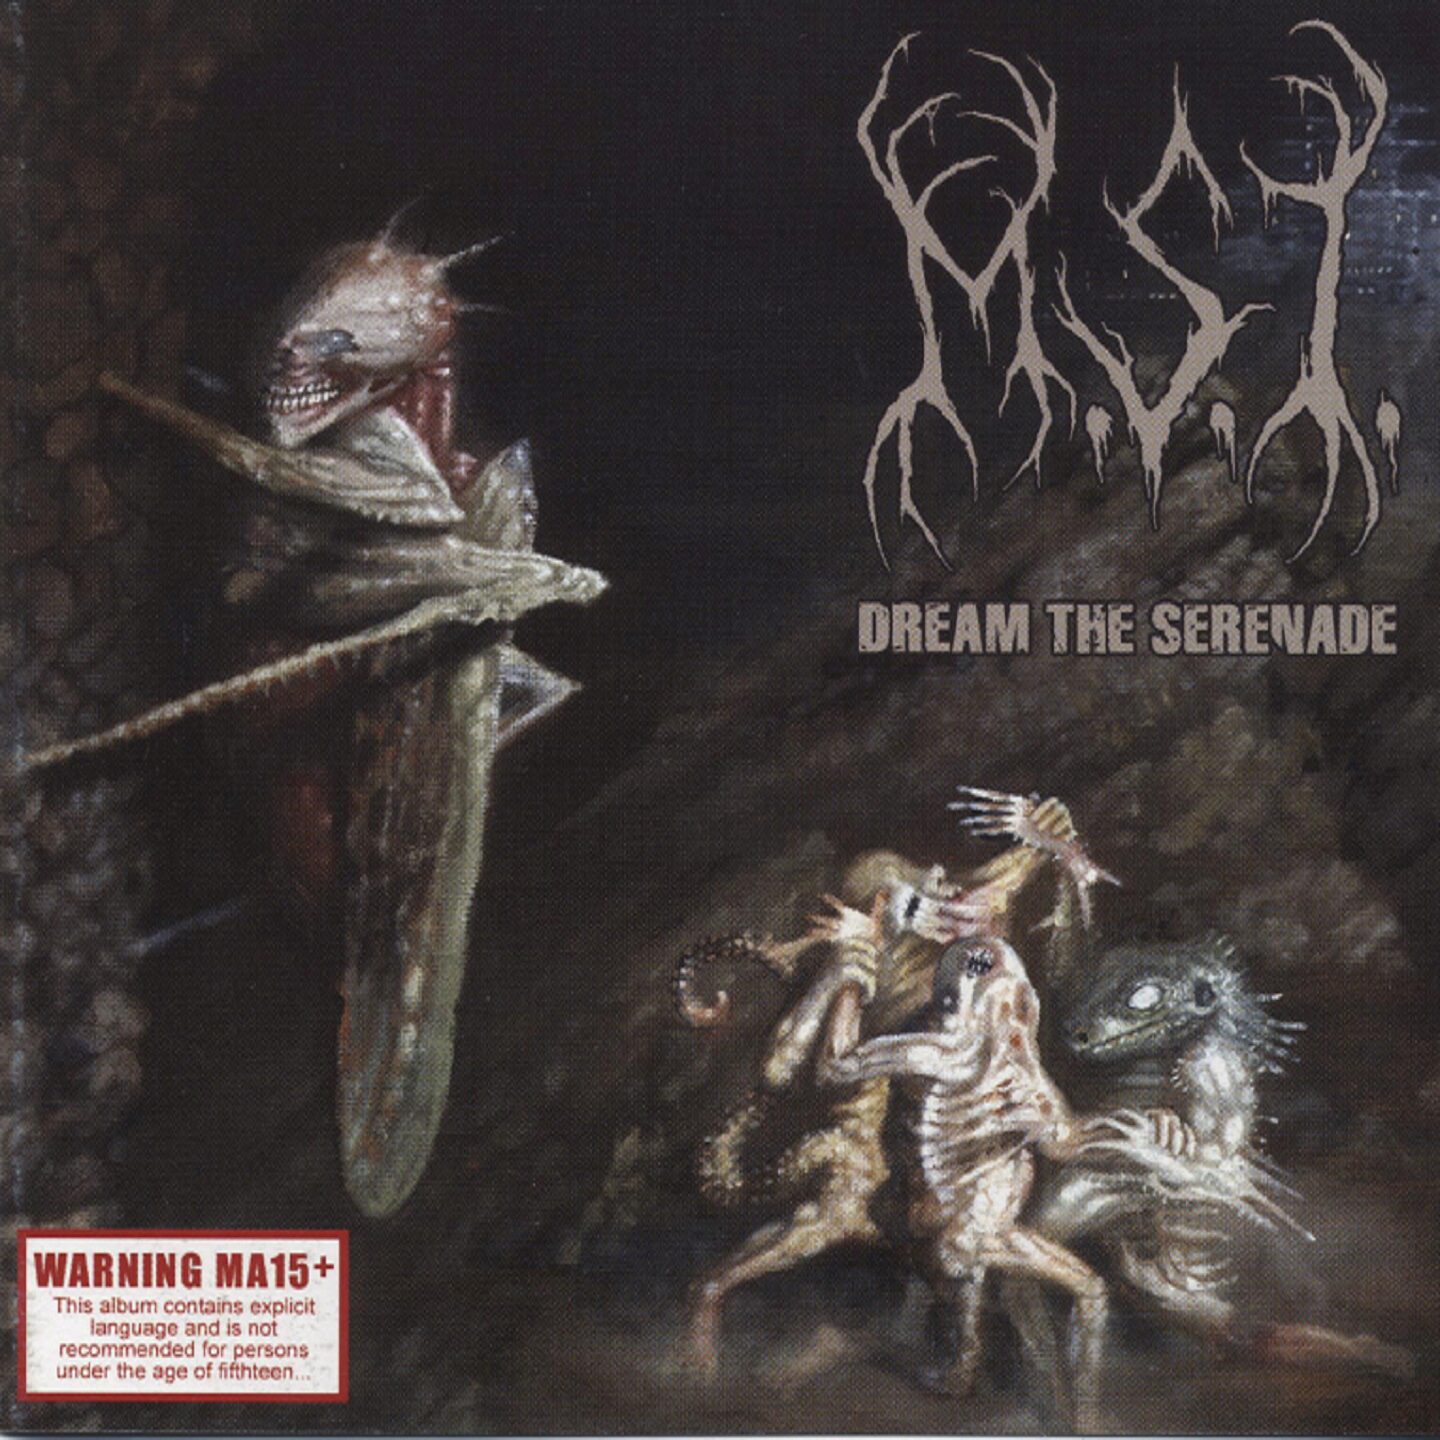 Cover for M.S.I. (Mutilated Spastic Iguana's) - Dream the Serenade (CD + DVD)